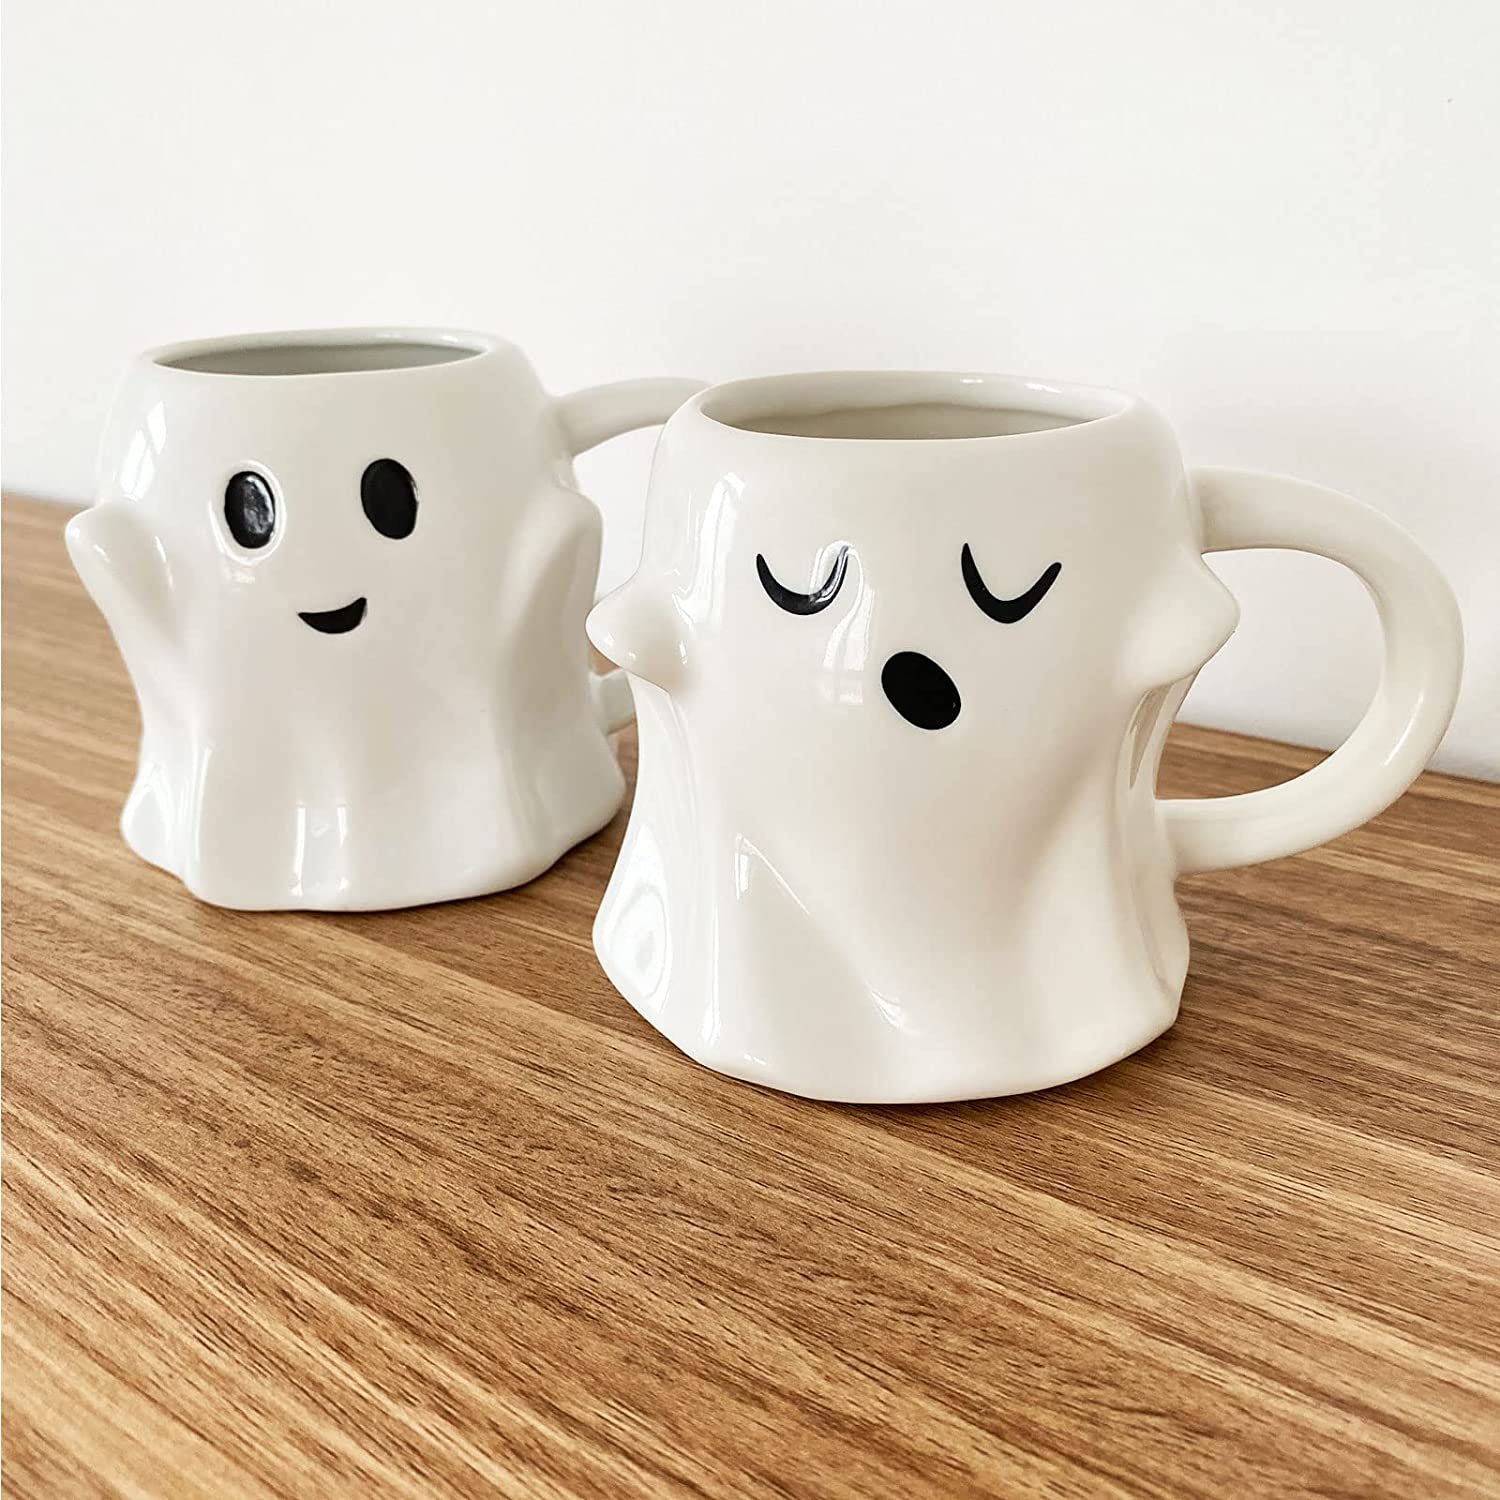 Two white ceramic ghost shaped coffee mugs on a wooden table. Both mugs have cute expressions printed on them.